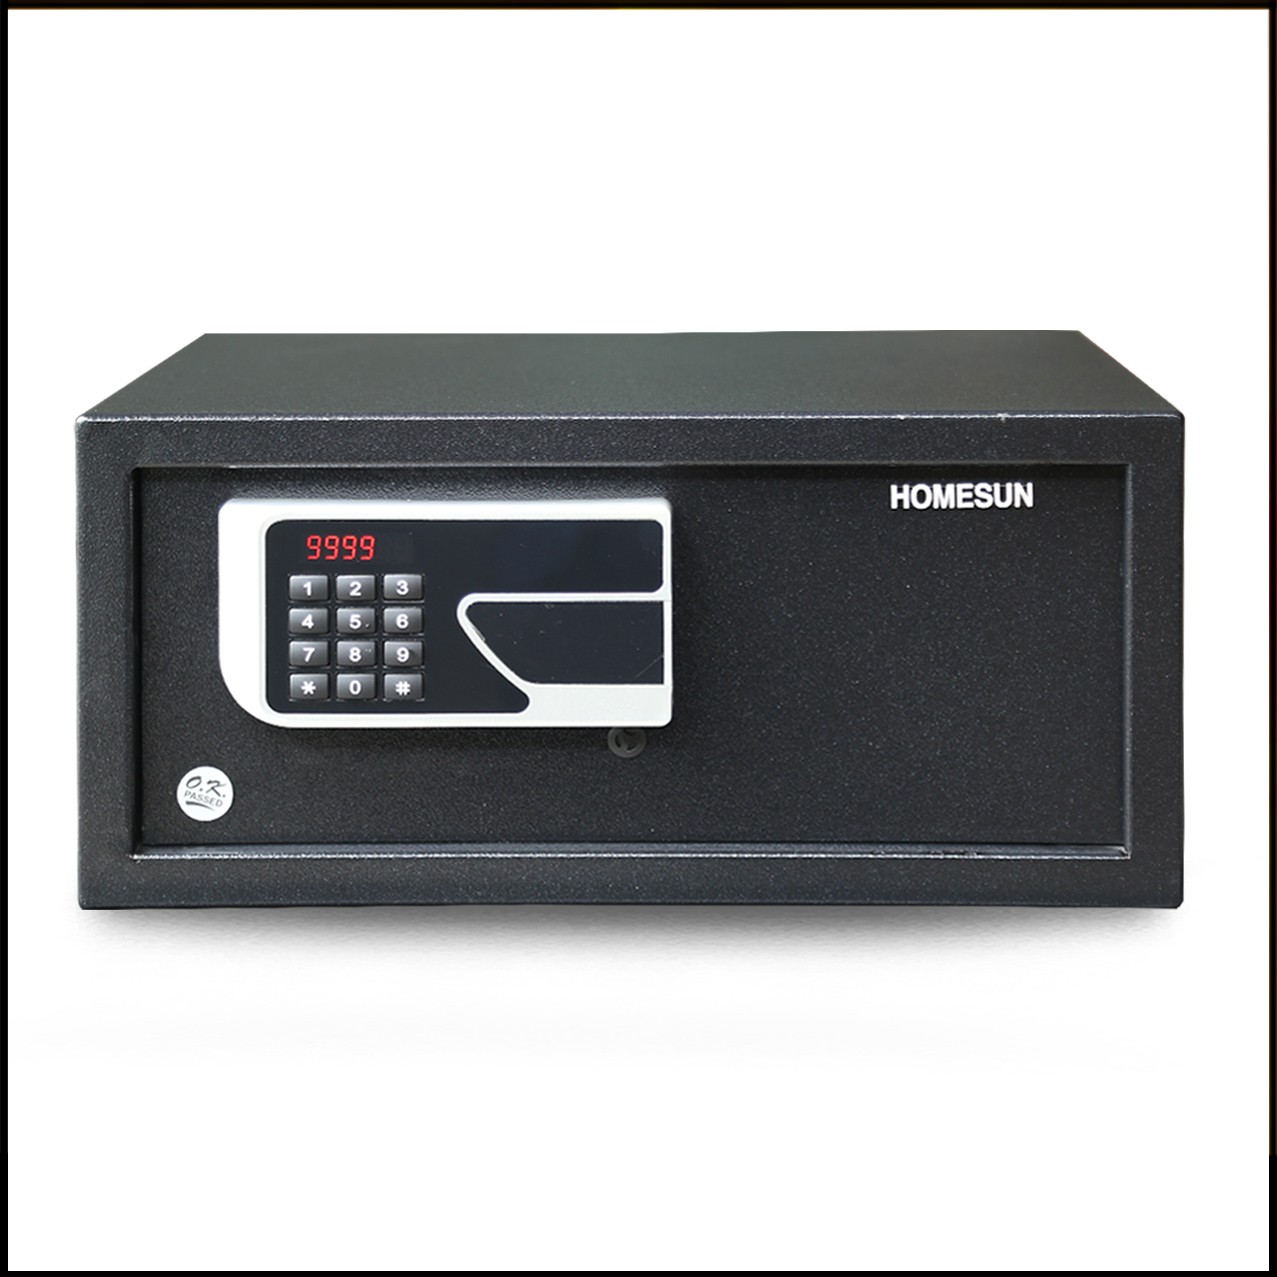 Best Hotel Safe For Home Wholesale Suppliers - Manufacturers & Suppliers